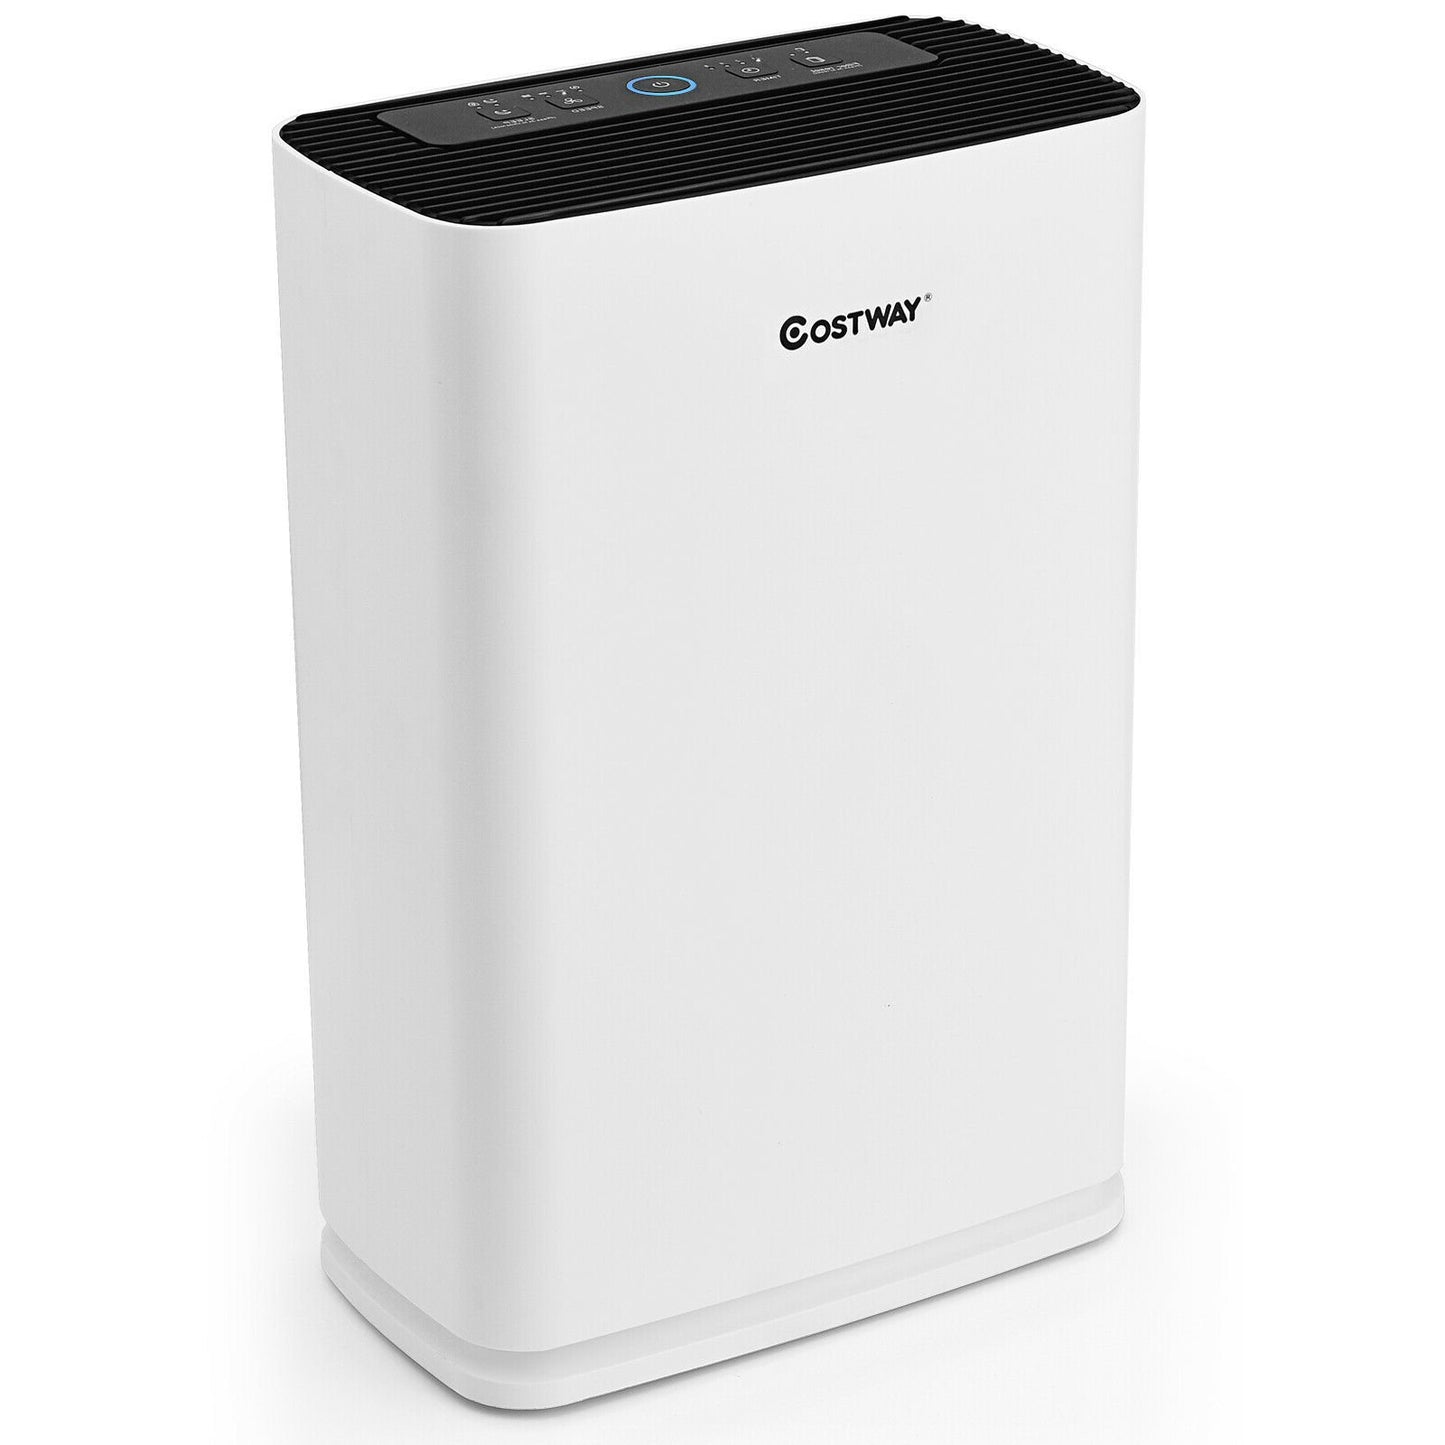 800 Sq. Ft Air Purifier True HEPA Filter Carbon Filter Air Cleaner Home Office, White at Gallery Canada